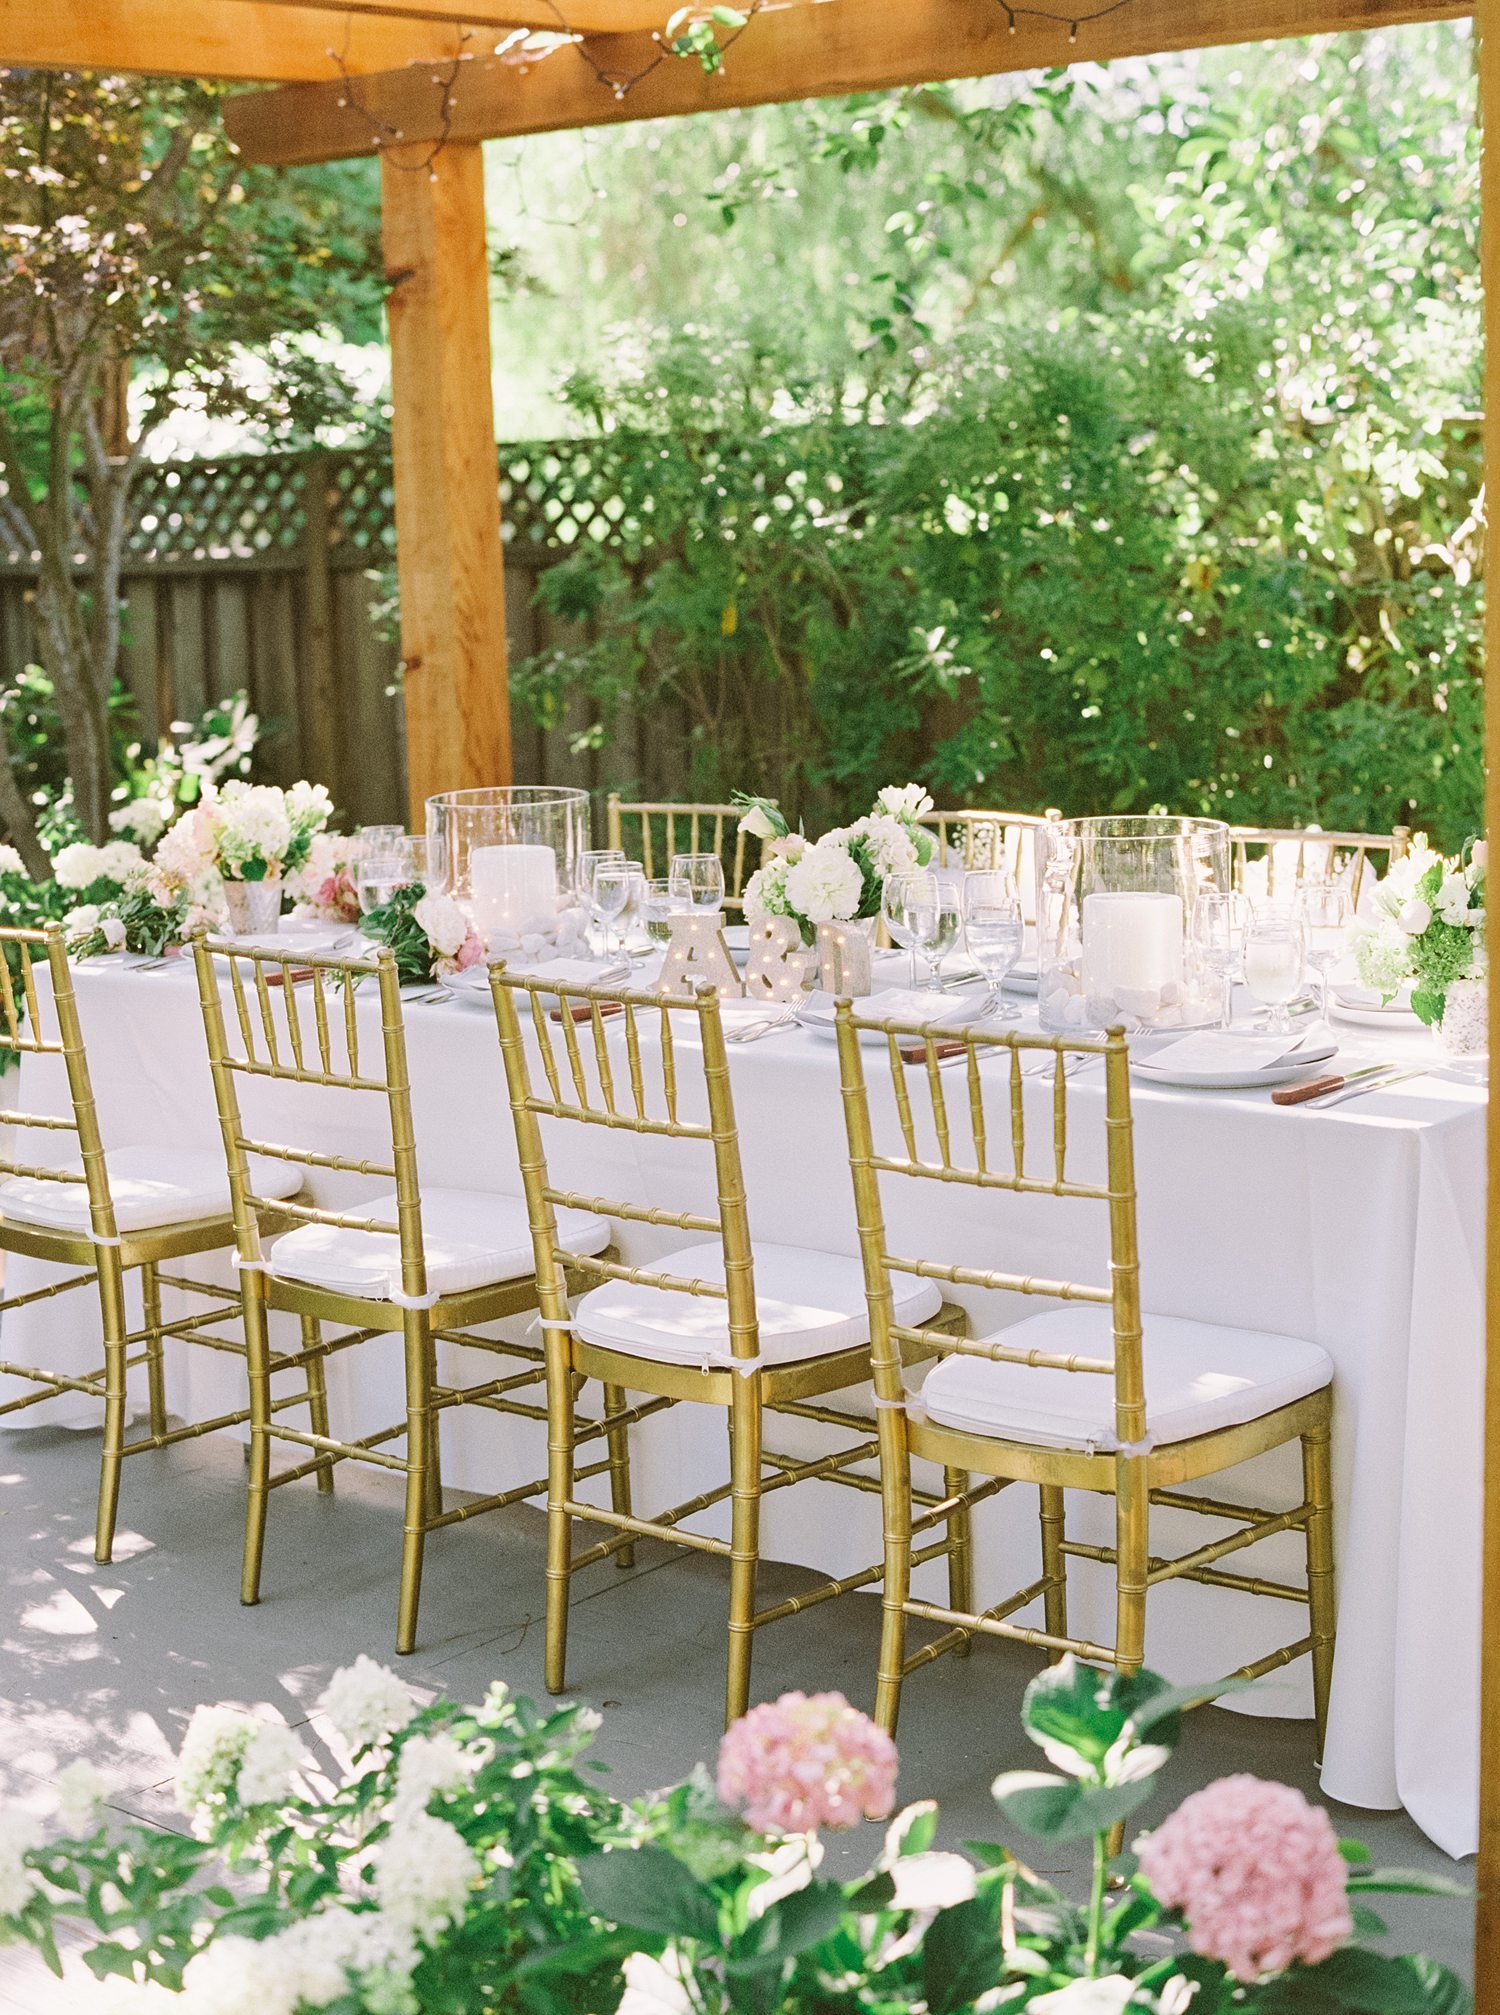 Gold chairs at wedding reception